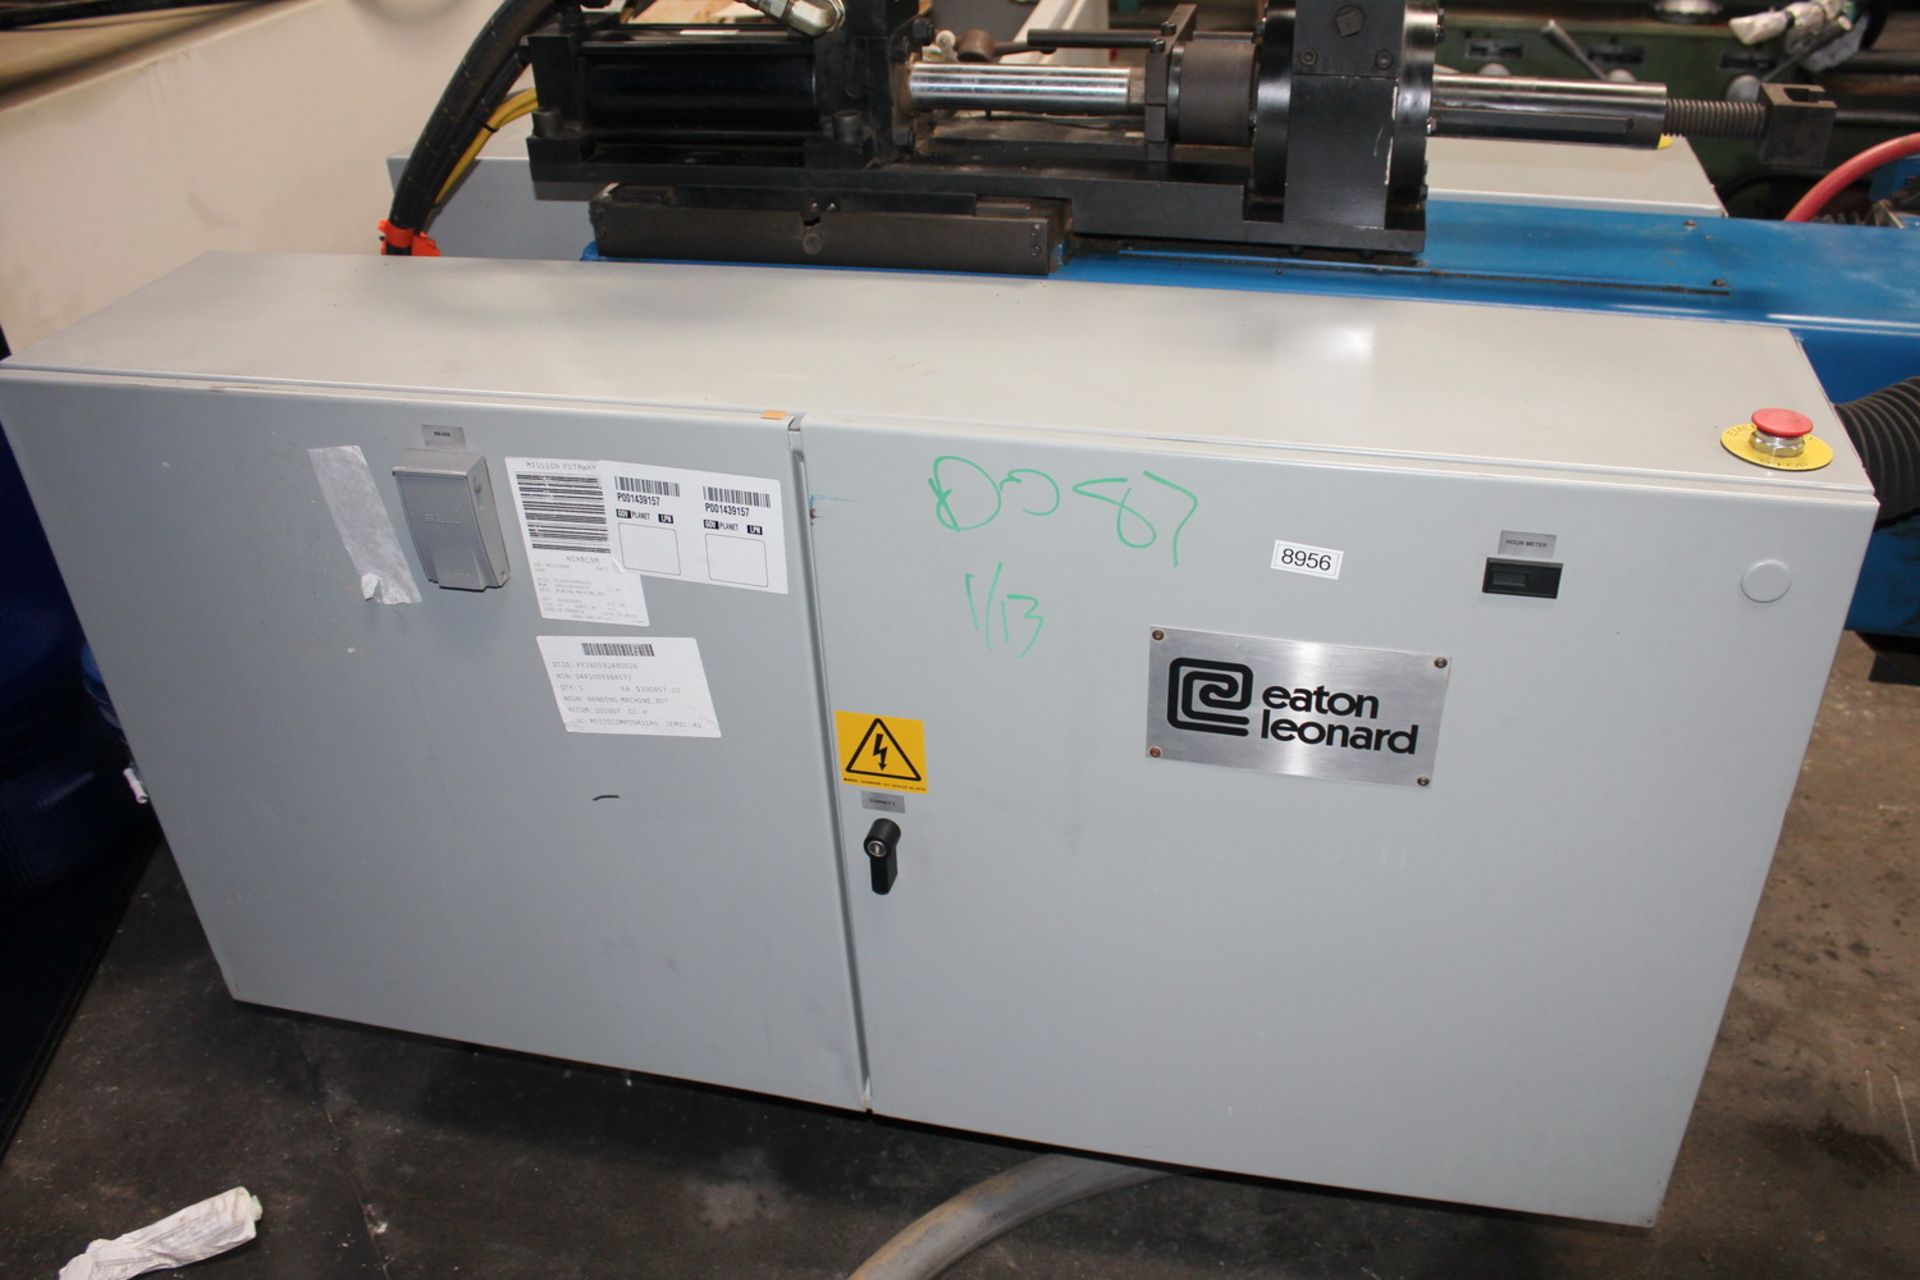 Eaton Leonard 2 Axis CNC Hydraulic Tube & Pipe Bender 2'' x 200''. LOADING FEE FOR THIS LOT: $750 - Image 18 of 21